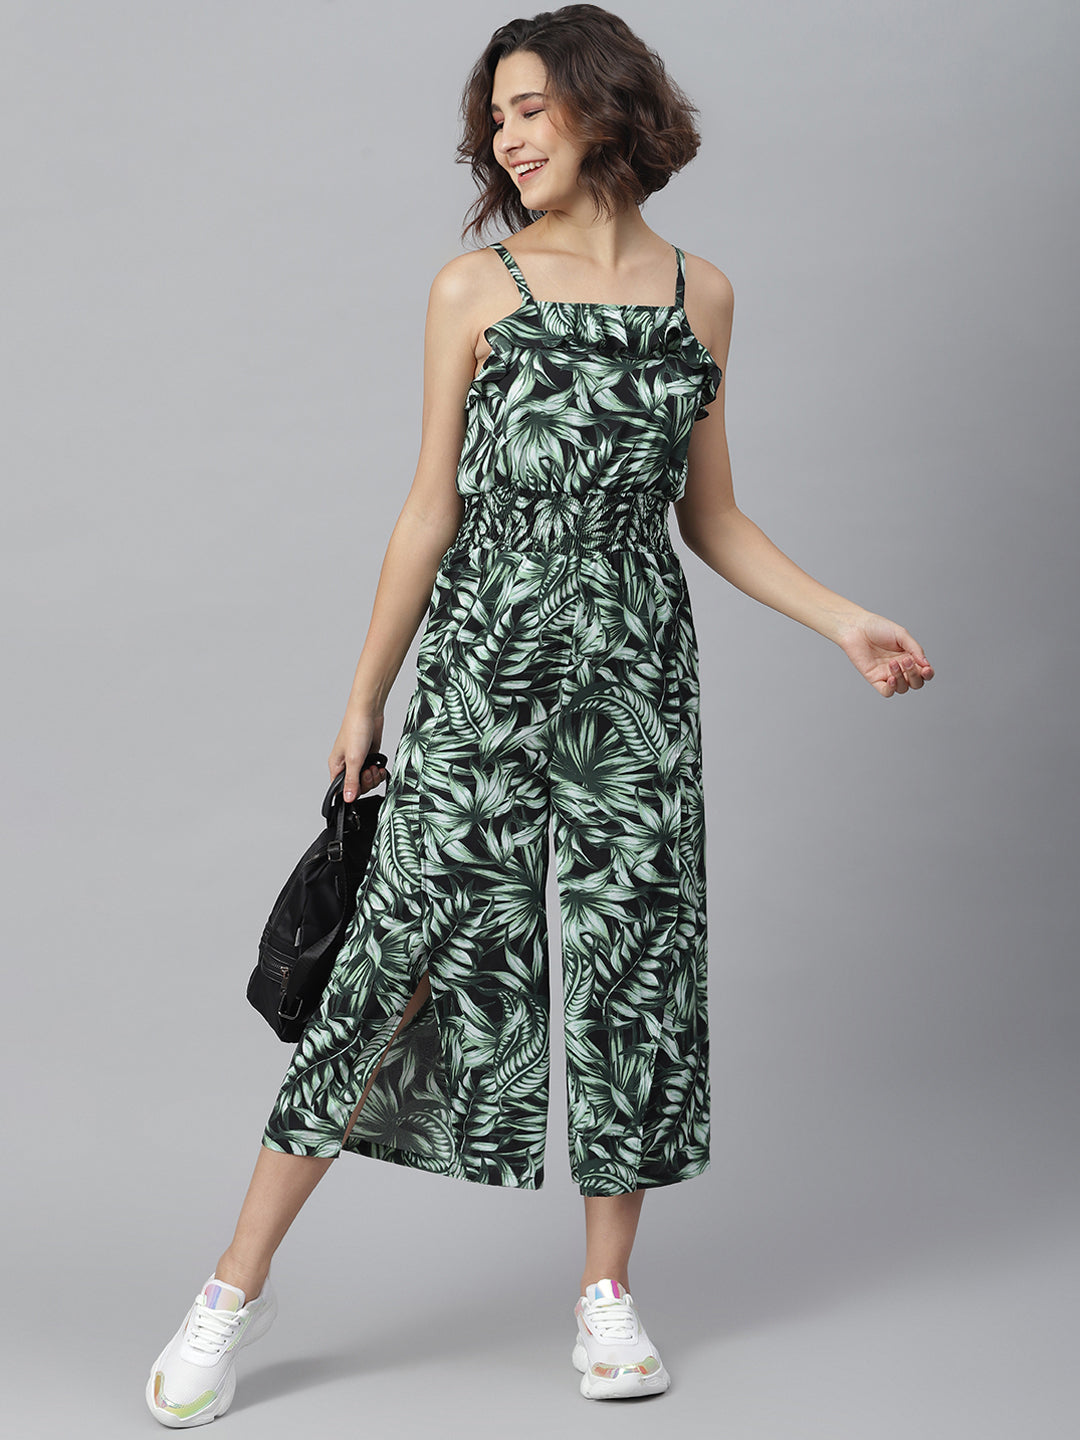 Women's printed Jumpsuit with slit Pants